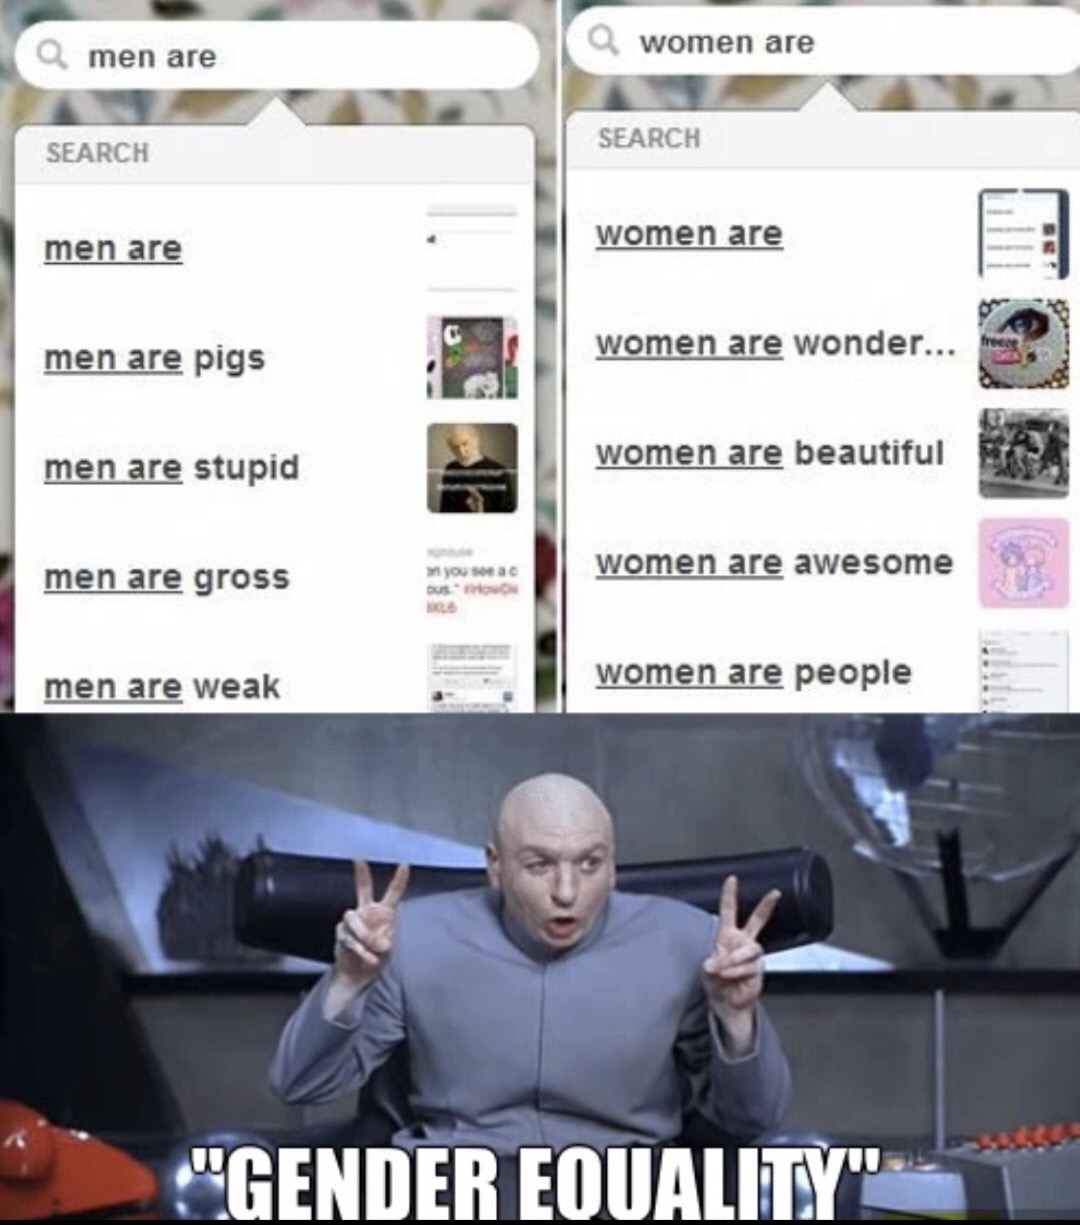 laser austin powers gif - Q men are Q women are Search Search men are women are men are pigs women are wonder... men are stupid women are beautiful men are gross you see ac women are awesome men are weak women are people "Gender Equality".